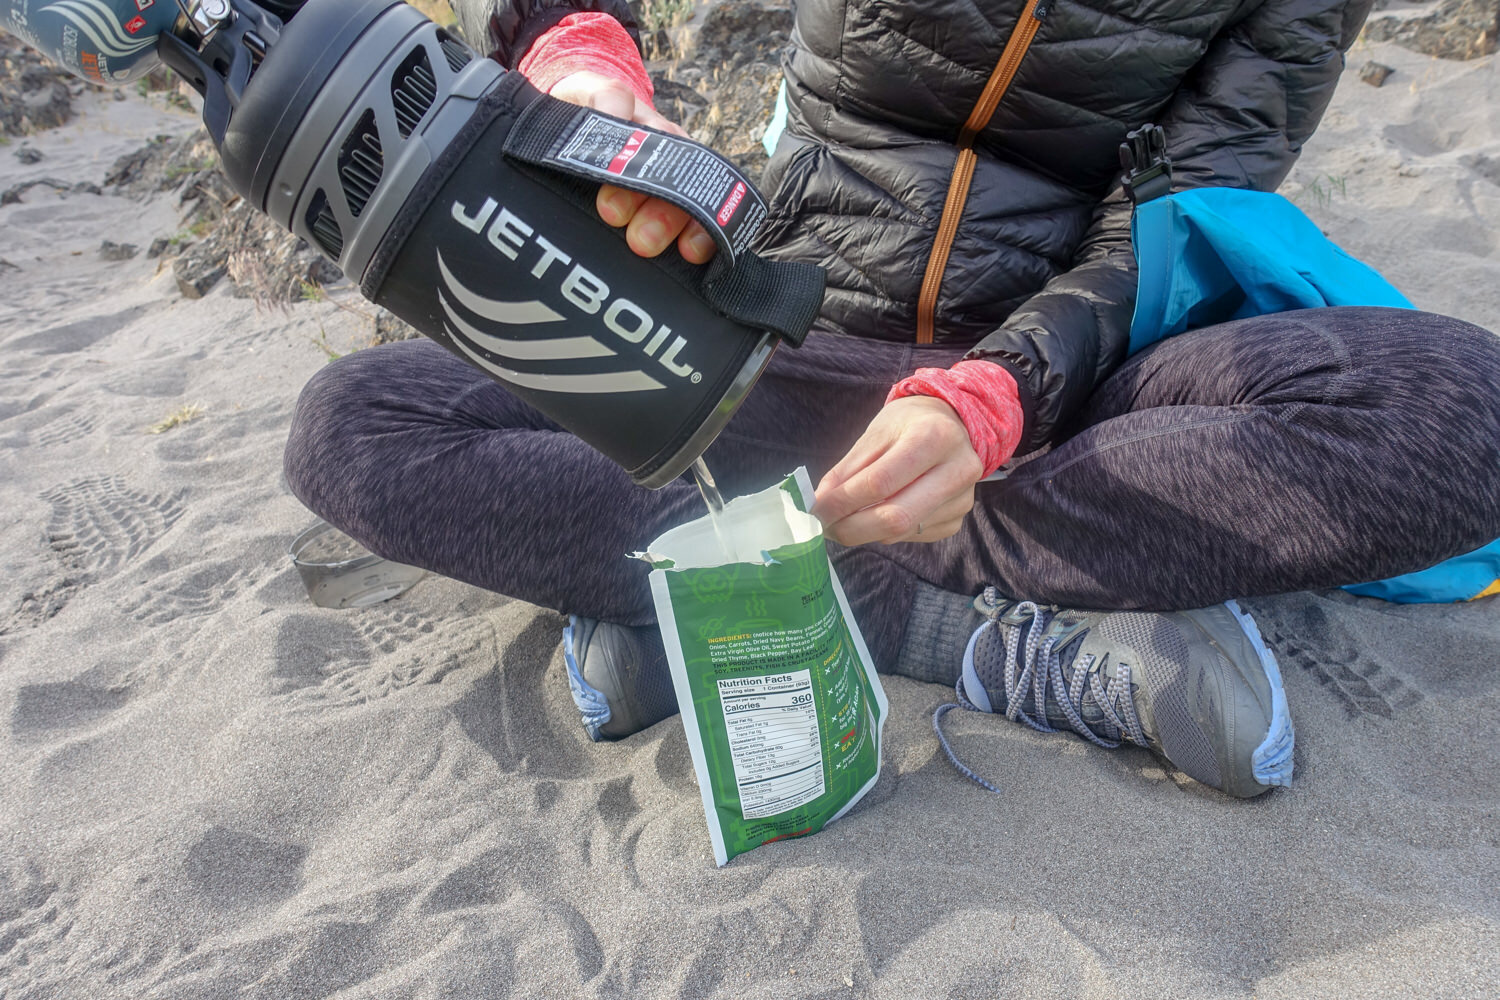 The JetBoil Flash is perfect for those who only need a stove to boil water for freeze-dried meals.